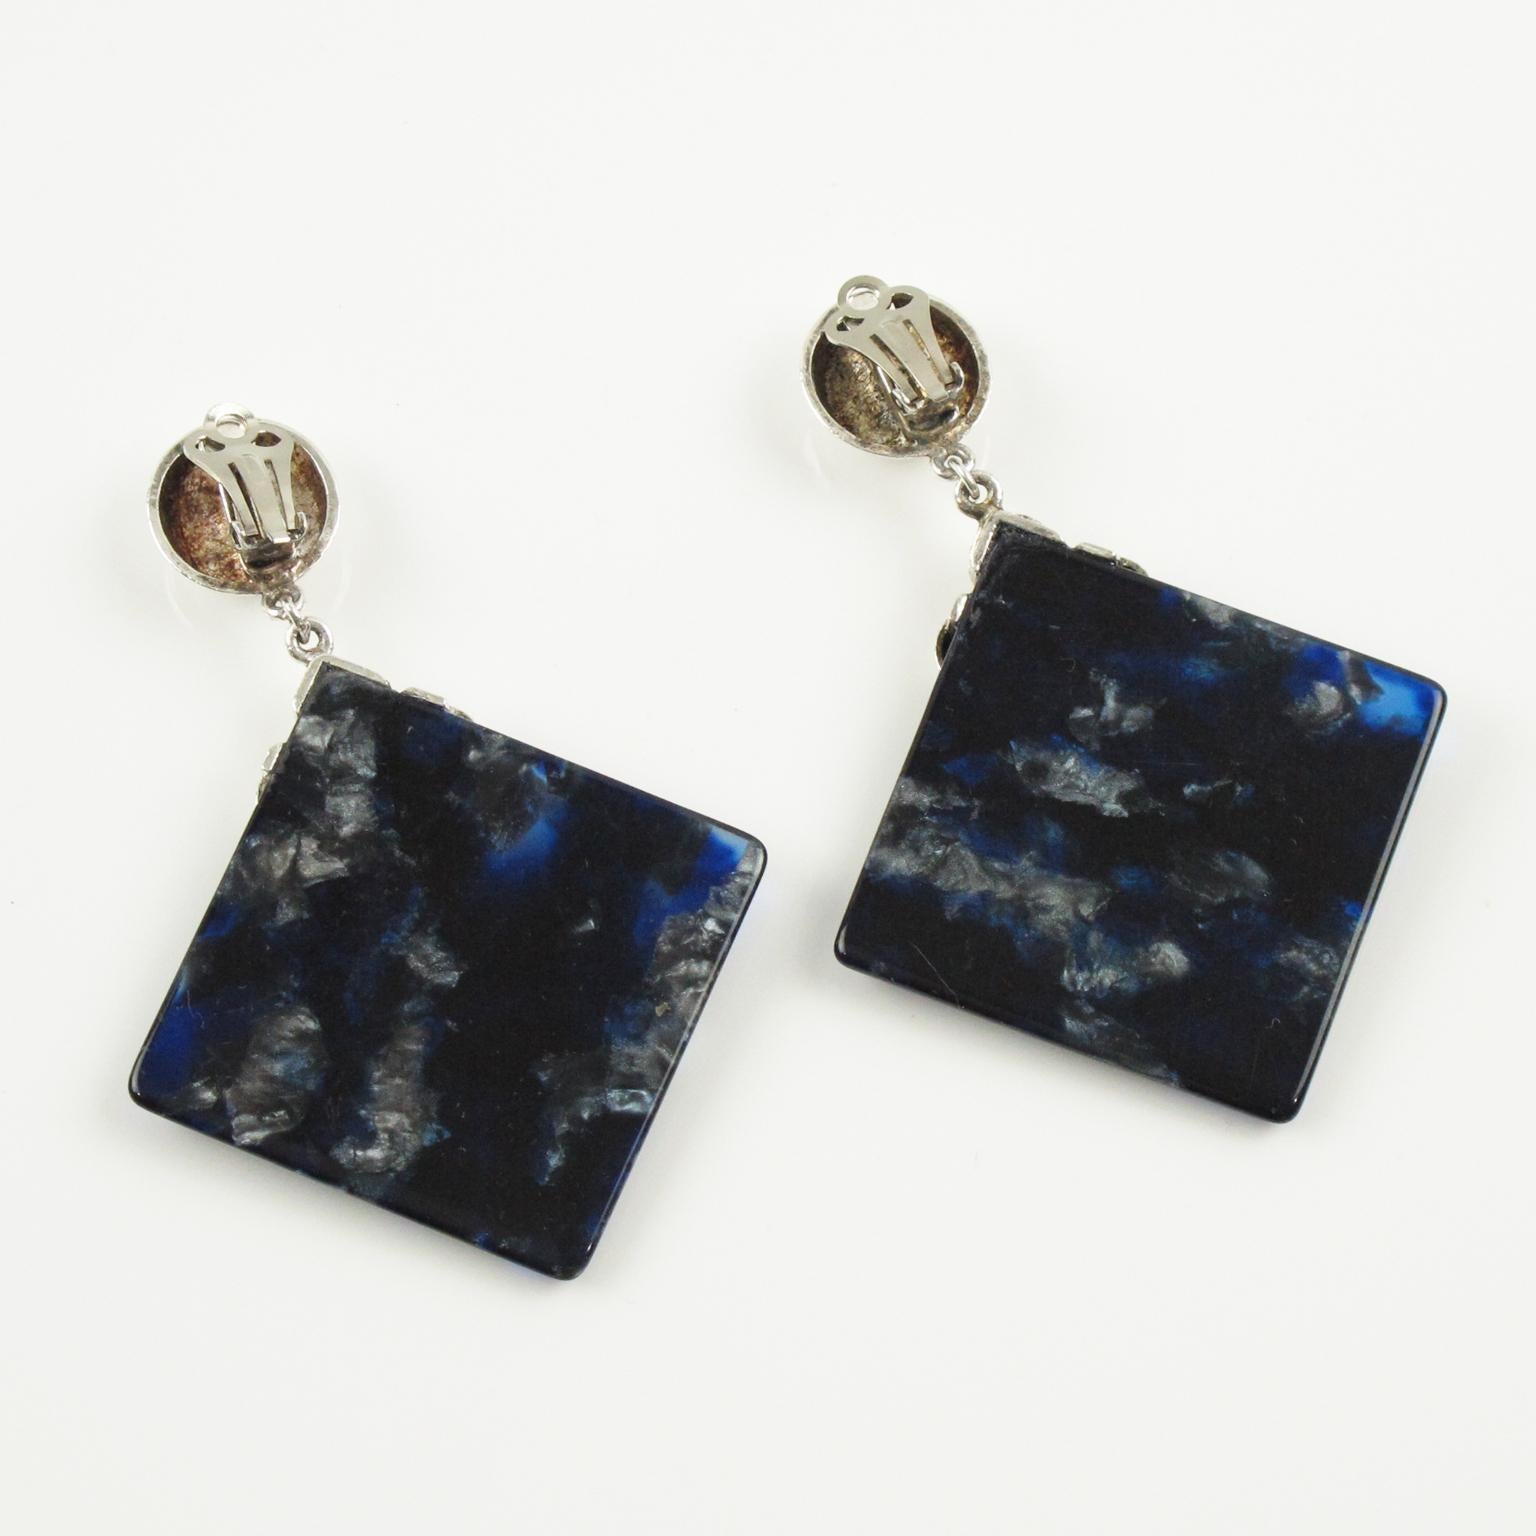 Lucite Dangle Geometric Clip Earrings with Blue Marble and Silver-plate Elements In Excellent Condition For Sale In Atlanta, GA